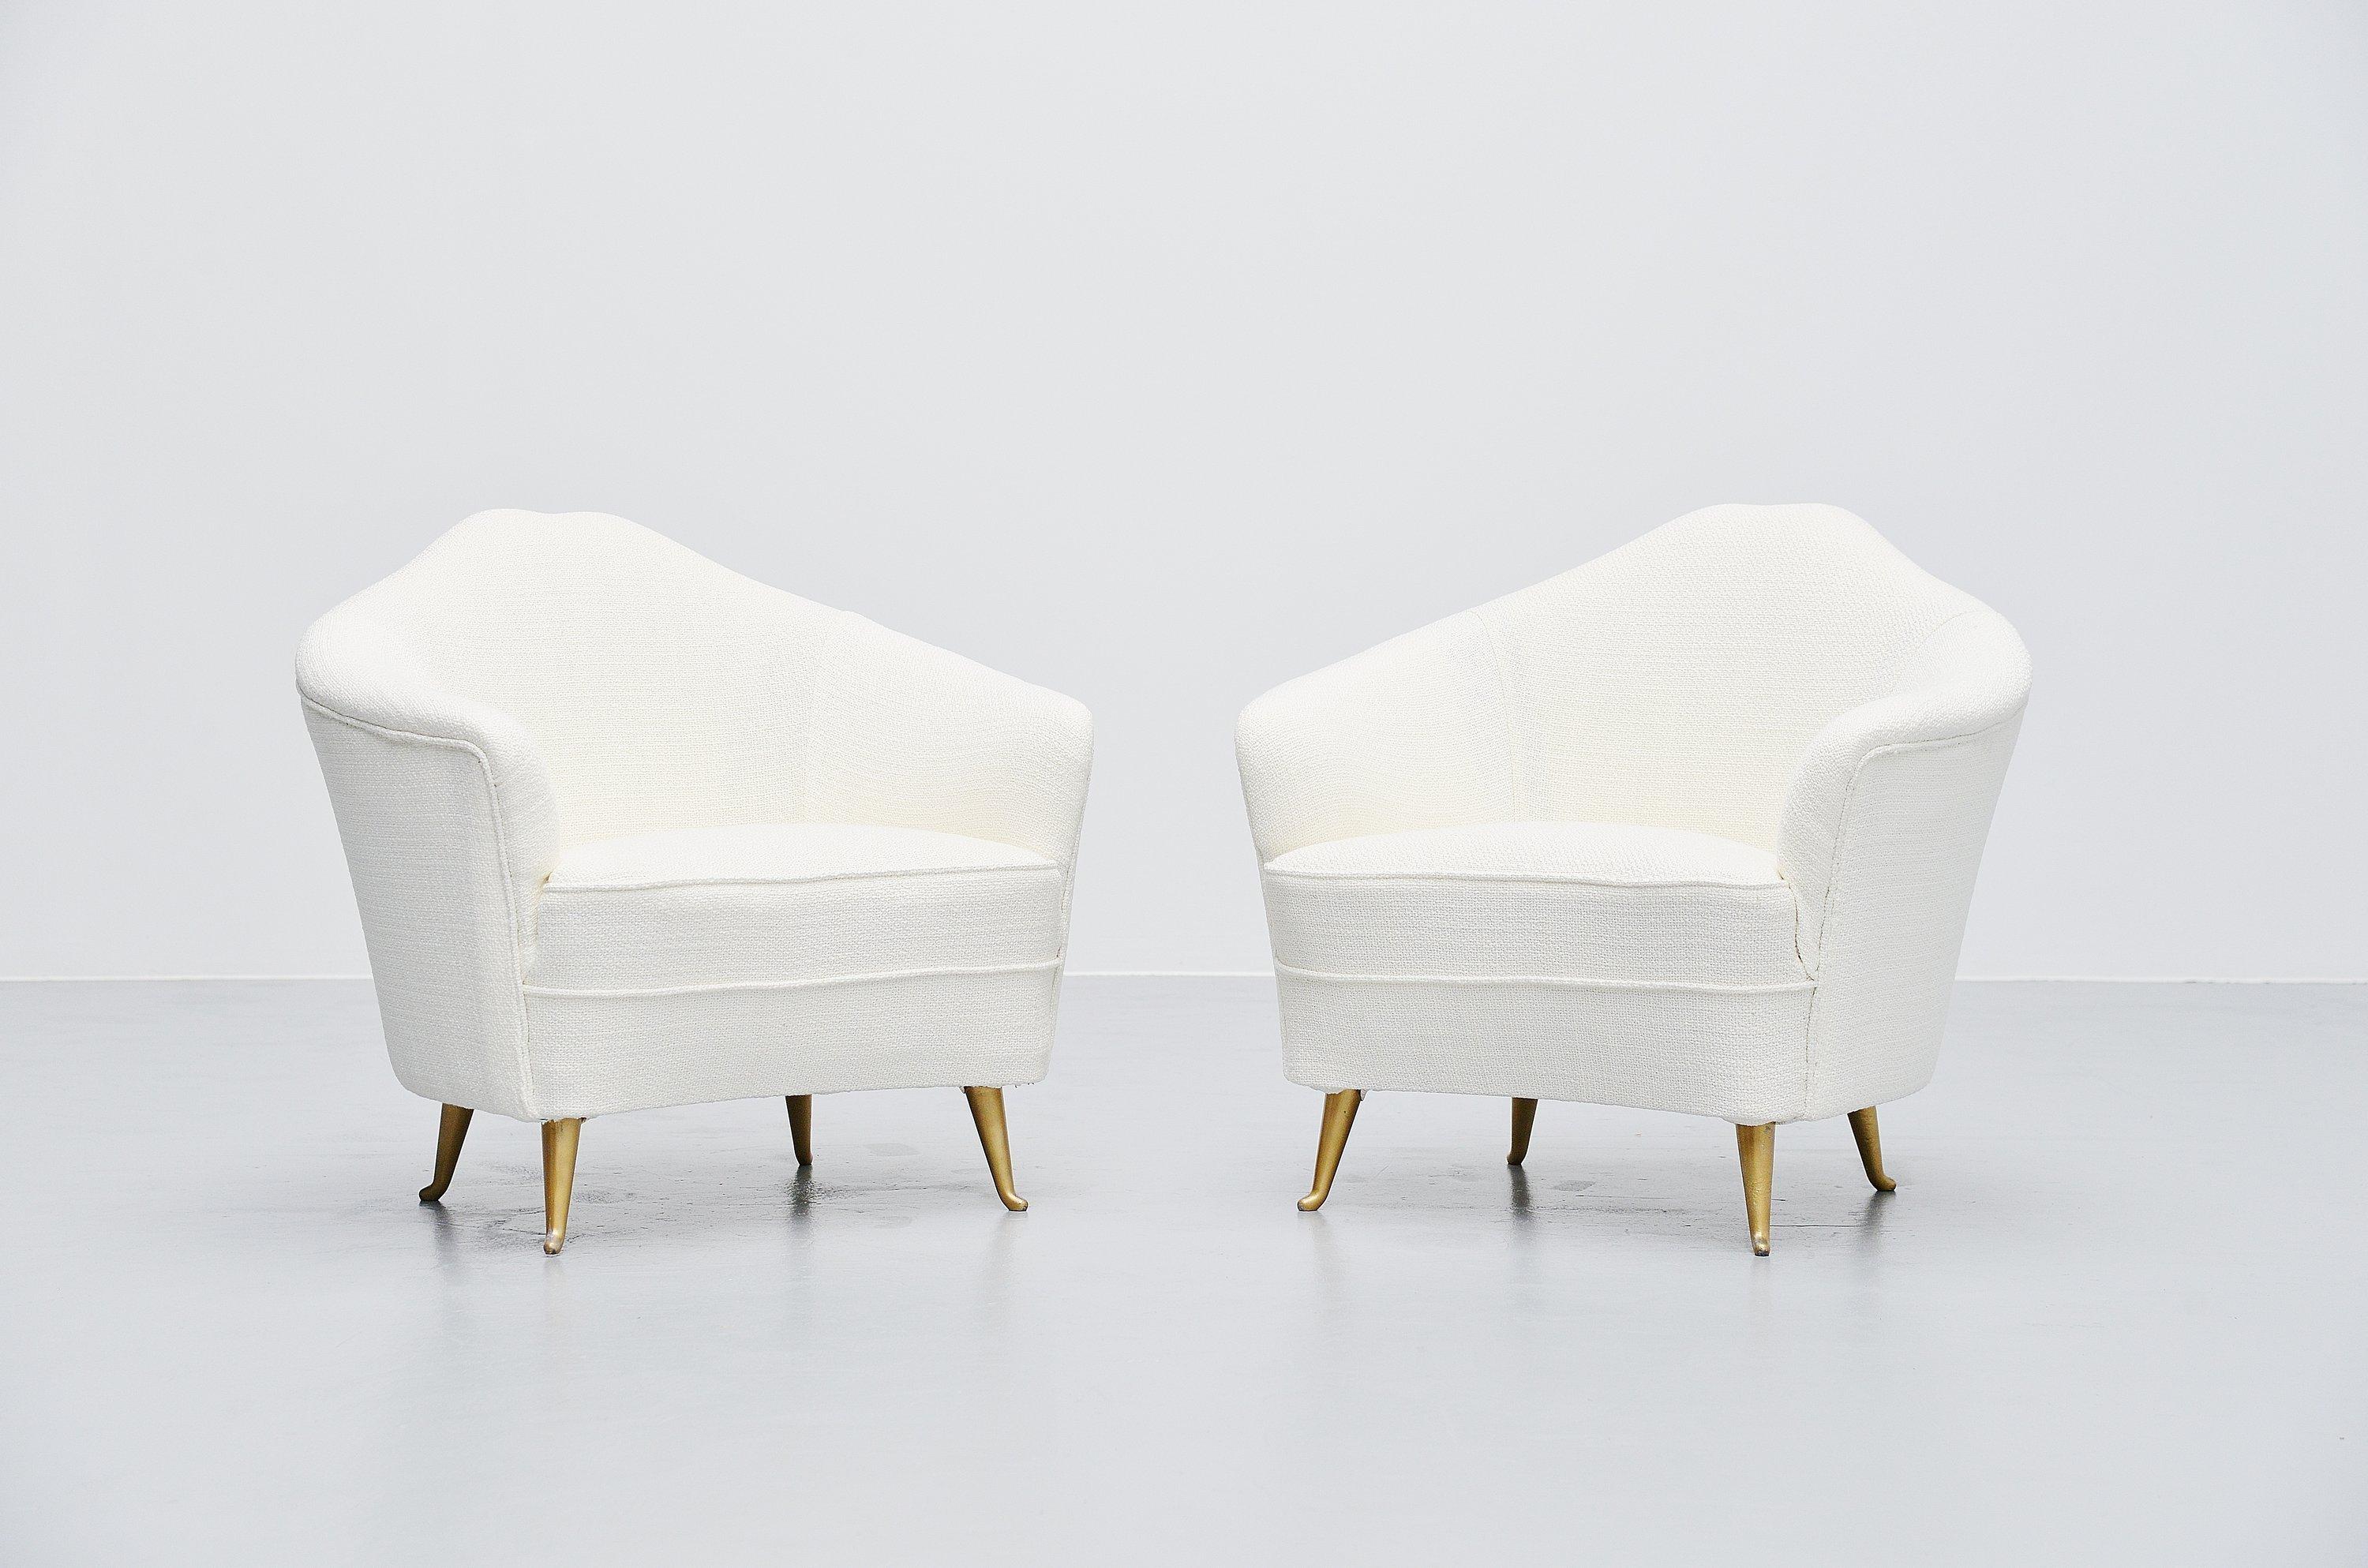 Small pair of club chairs designed and manufactured by Isa Bergamo, Italy 1950. This nice curved chairs are newly upholstered in white fabric upholstery and have cast aluminium legs which are gold painted. The small chairs have a very nice organic